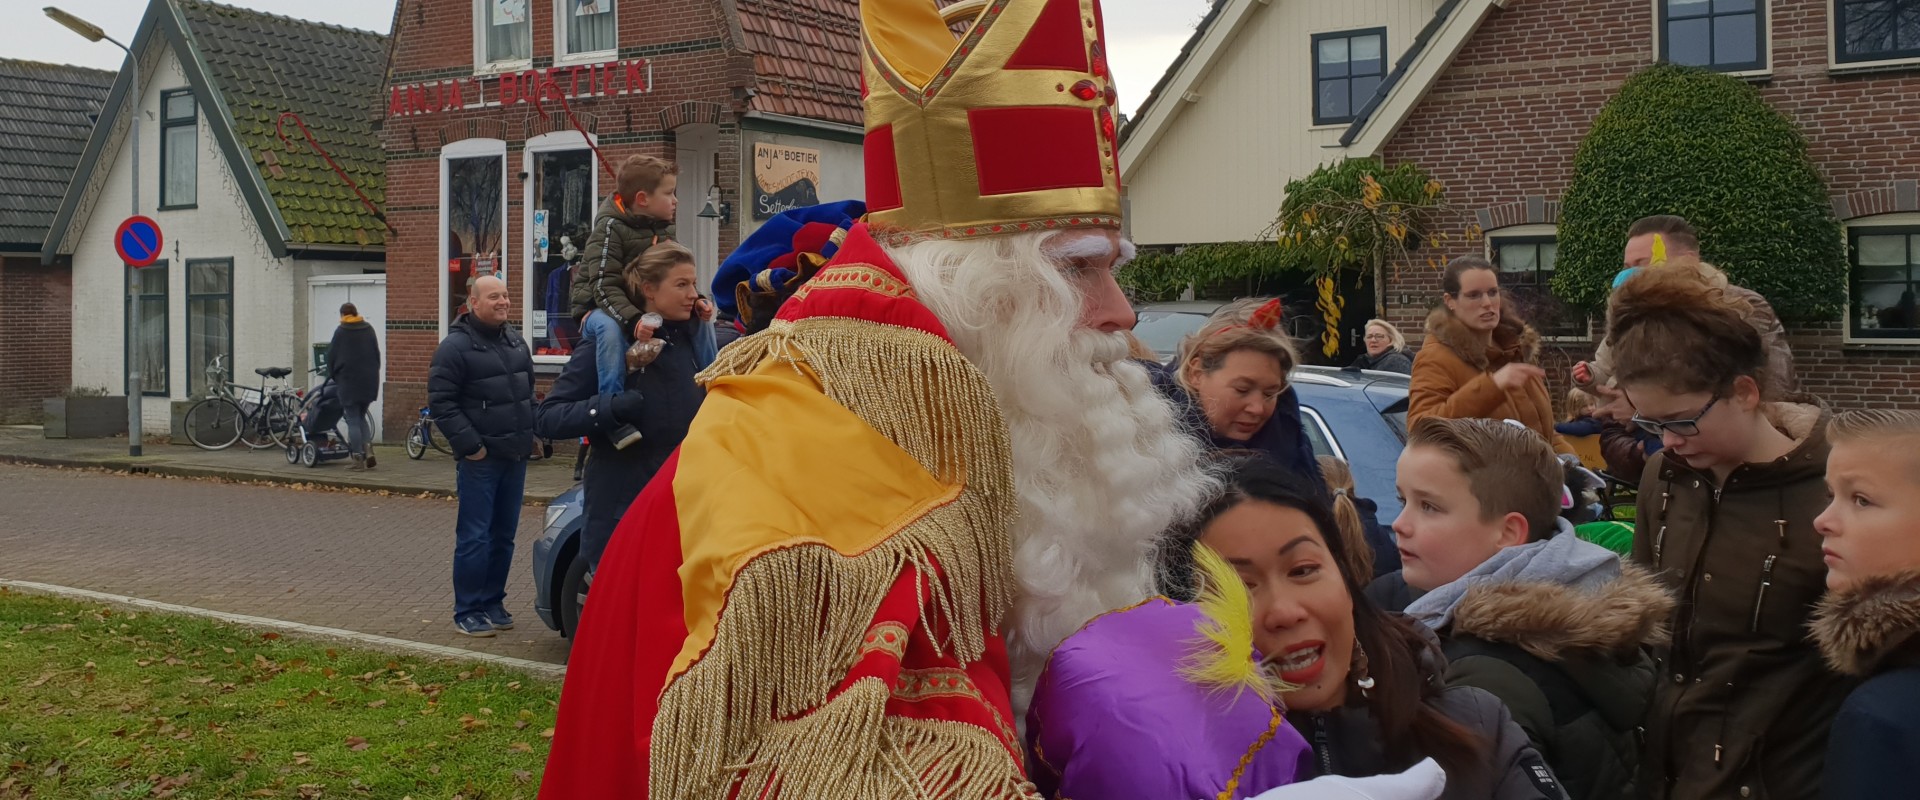 7 Things you should know about Sinterklaas